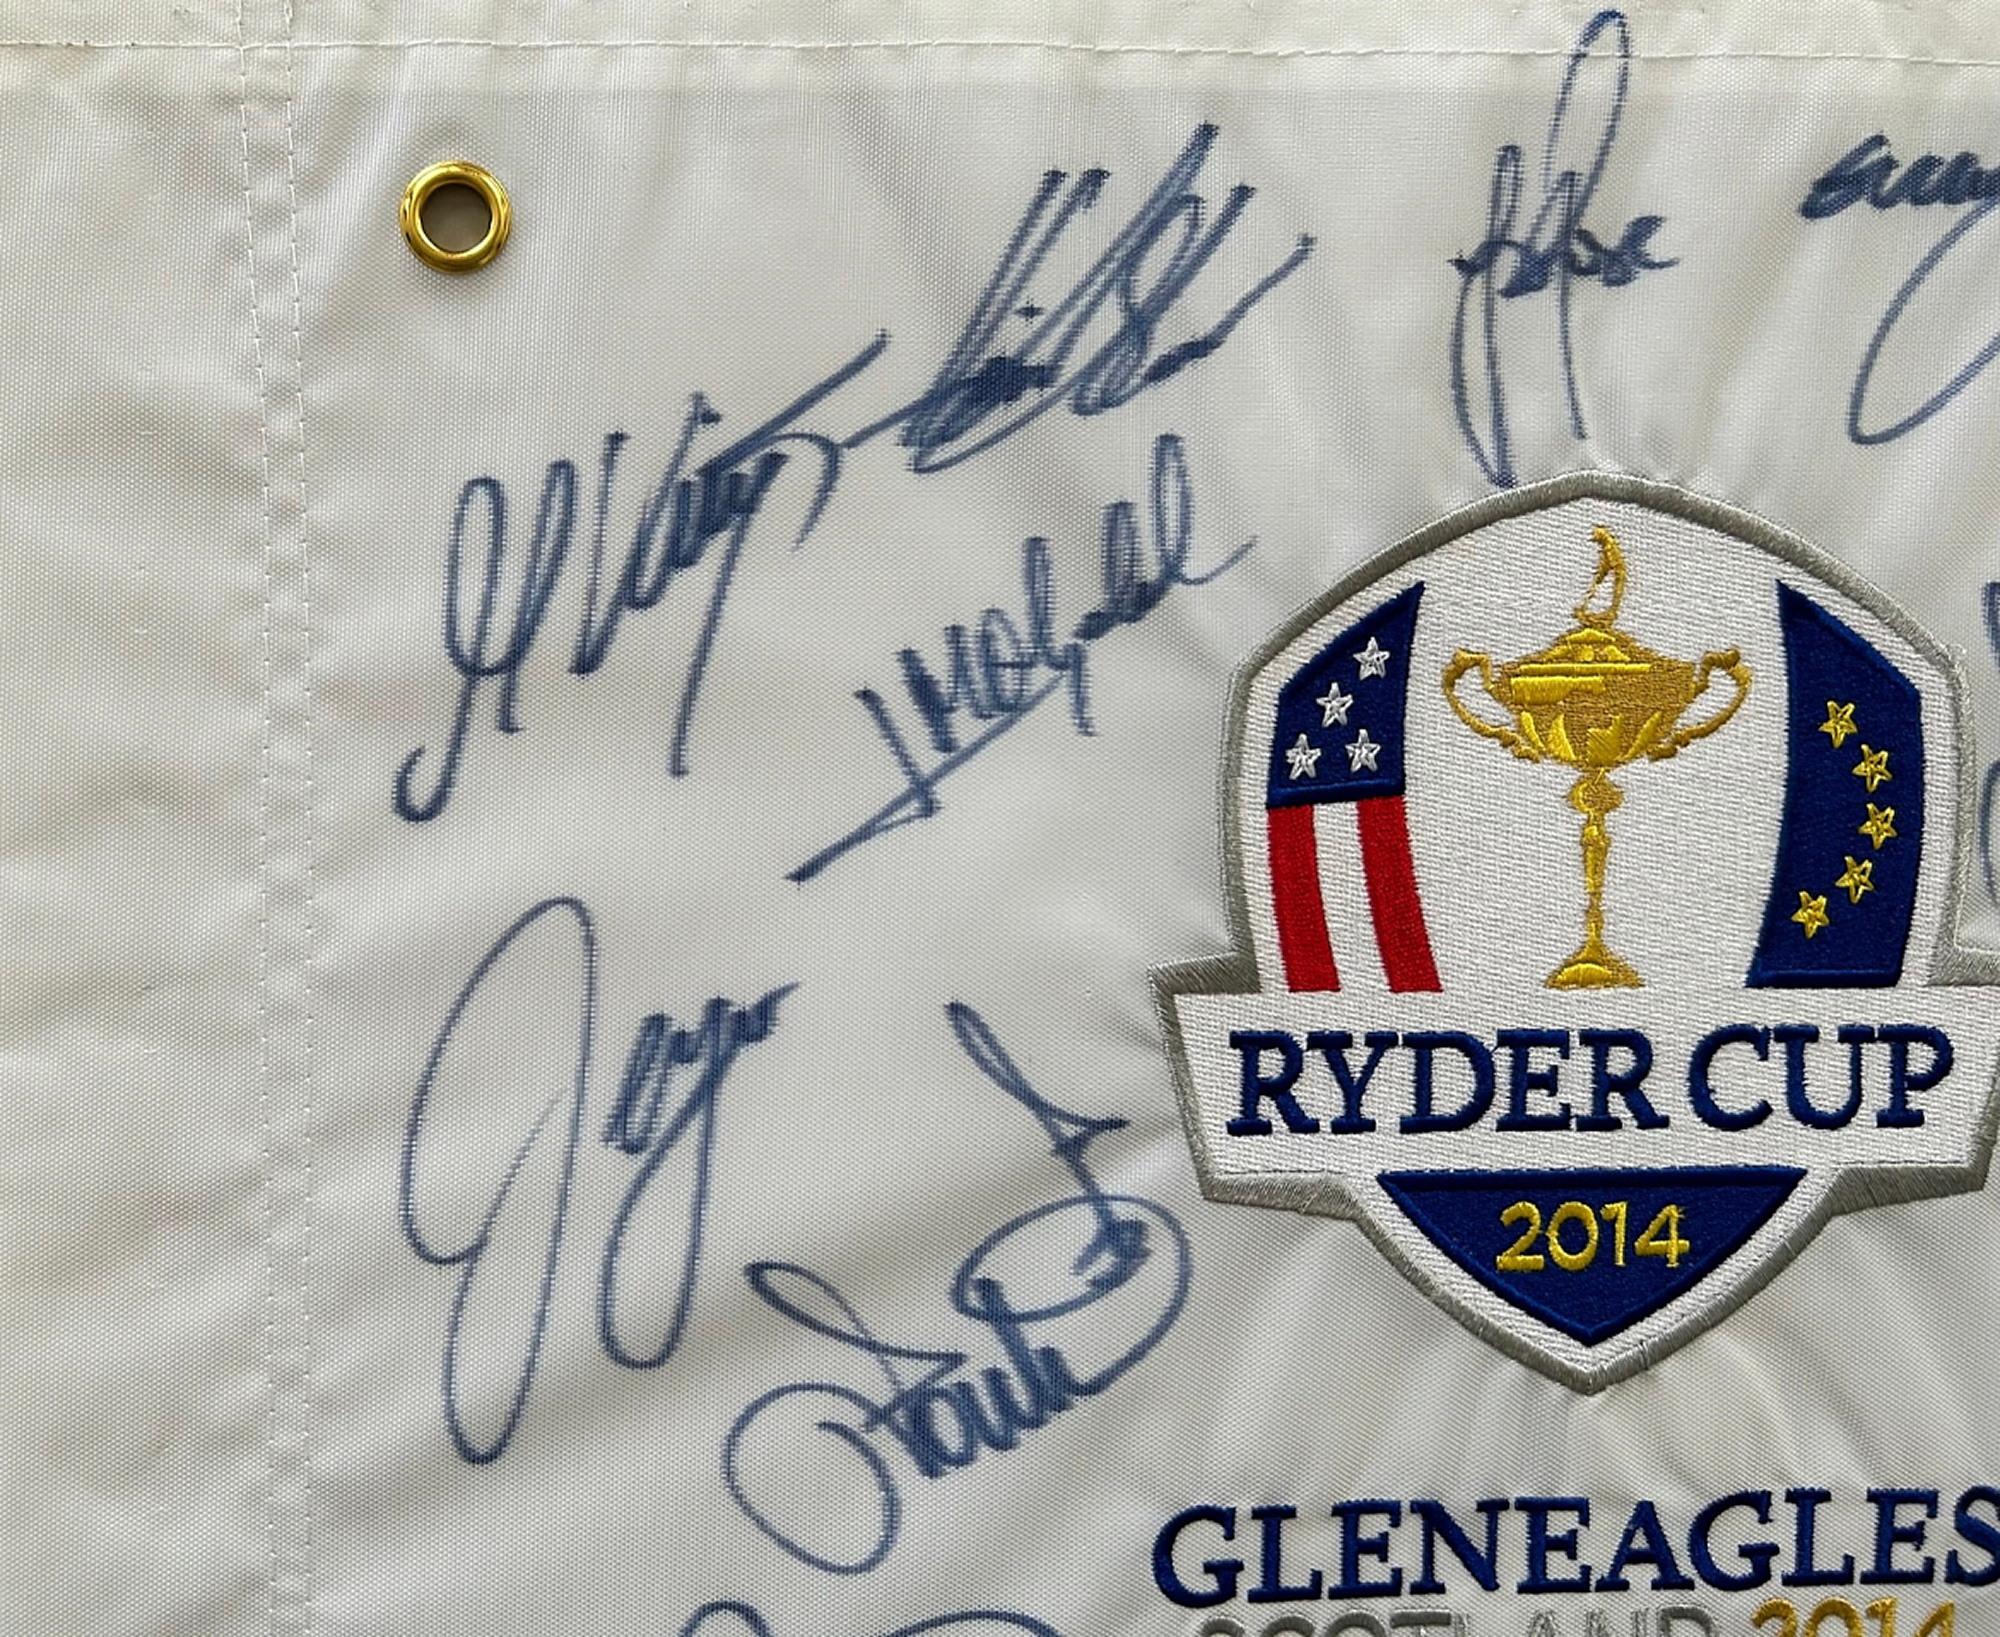 2014 Ryder Cup Signed Pin Flag
The 2014 competition was the 40th Ryder Cup and the matches were held during 26-28 September in Scotland on the PGA Centenary Course at the Gleneagles Hotel near Auchterarder in Perth and Kinross. (This was the second